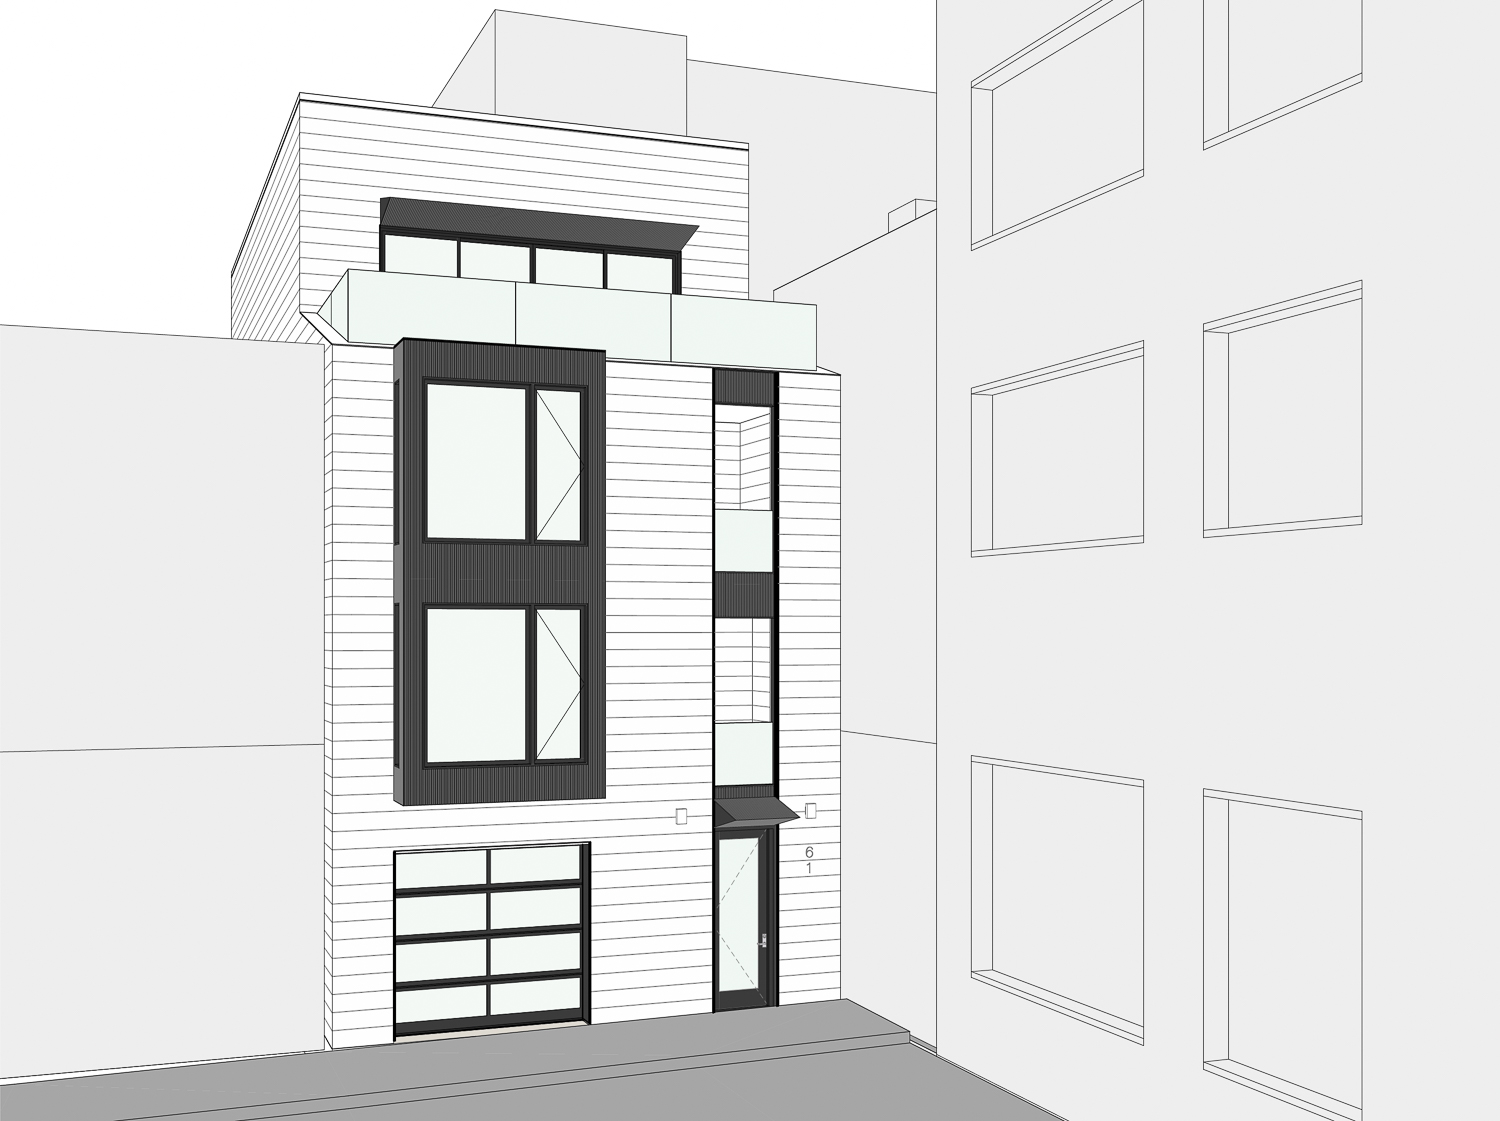 61 Rodgers Street, illustration by RG Architecture